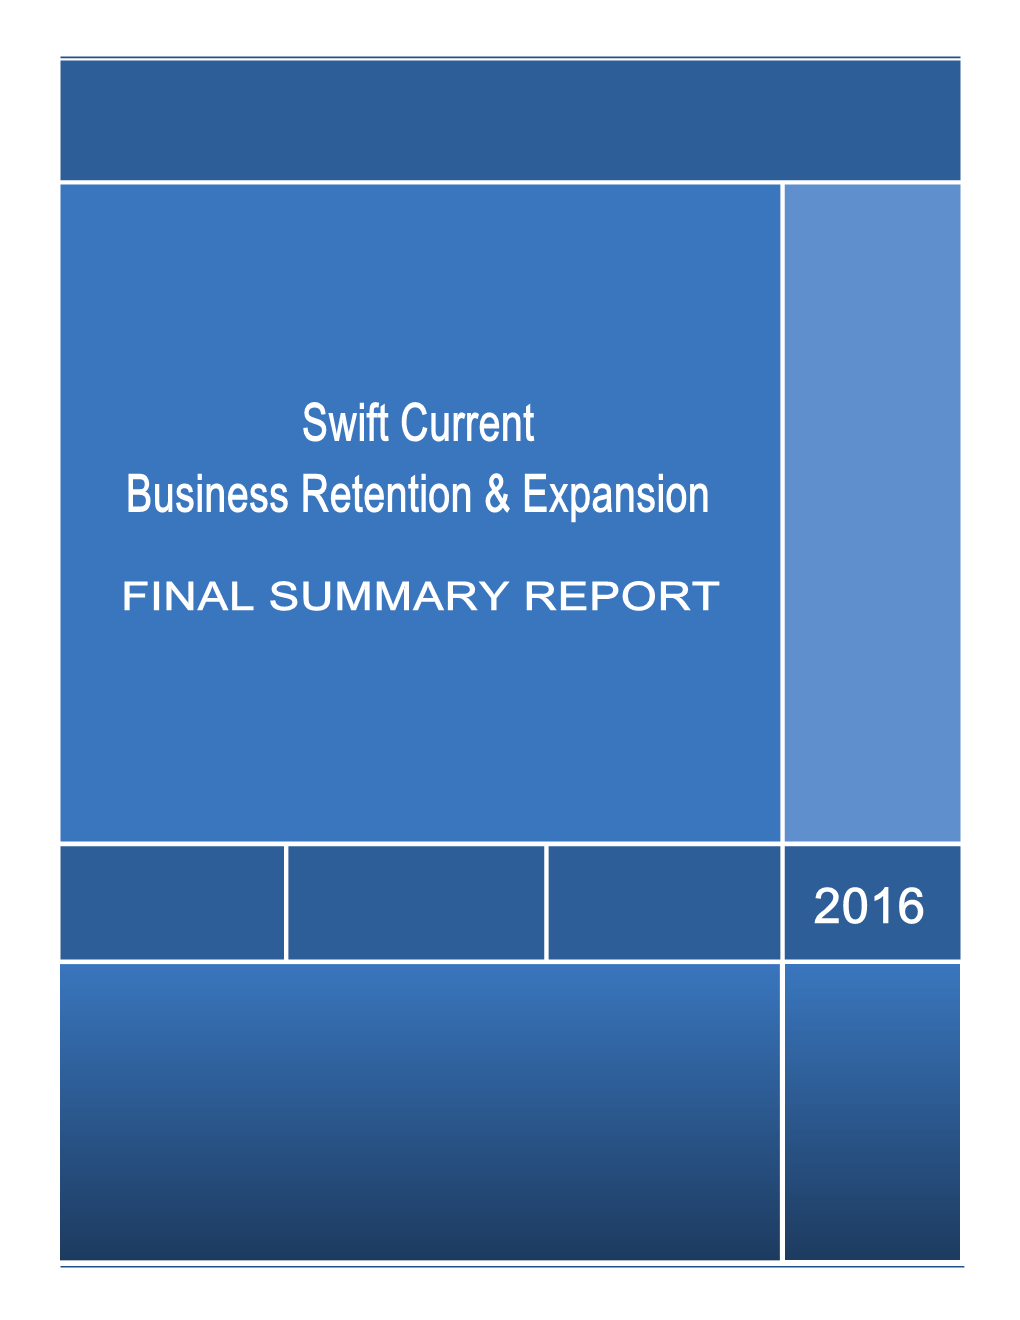 Swift Current Business Retention and Expansion (BRE)